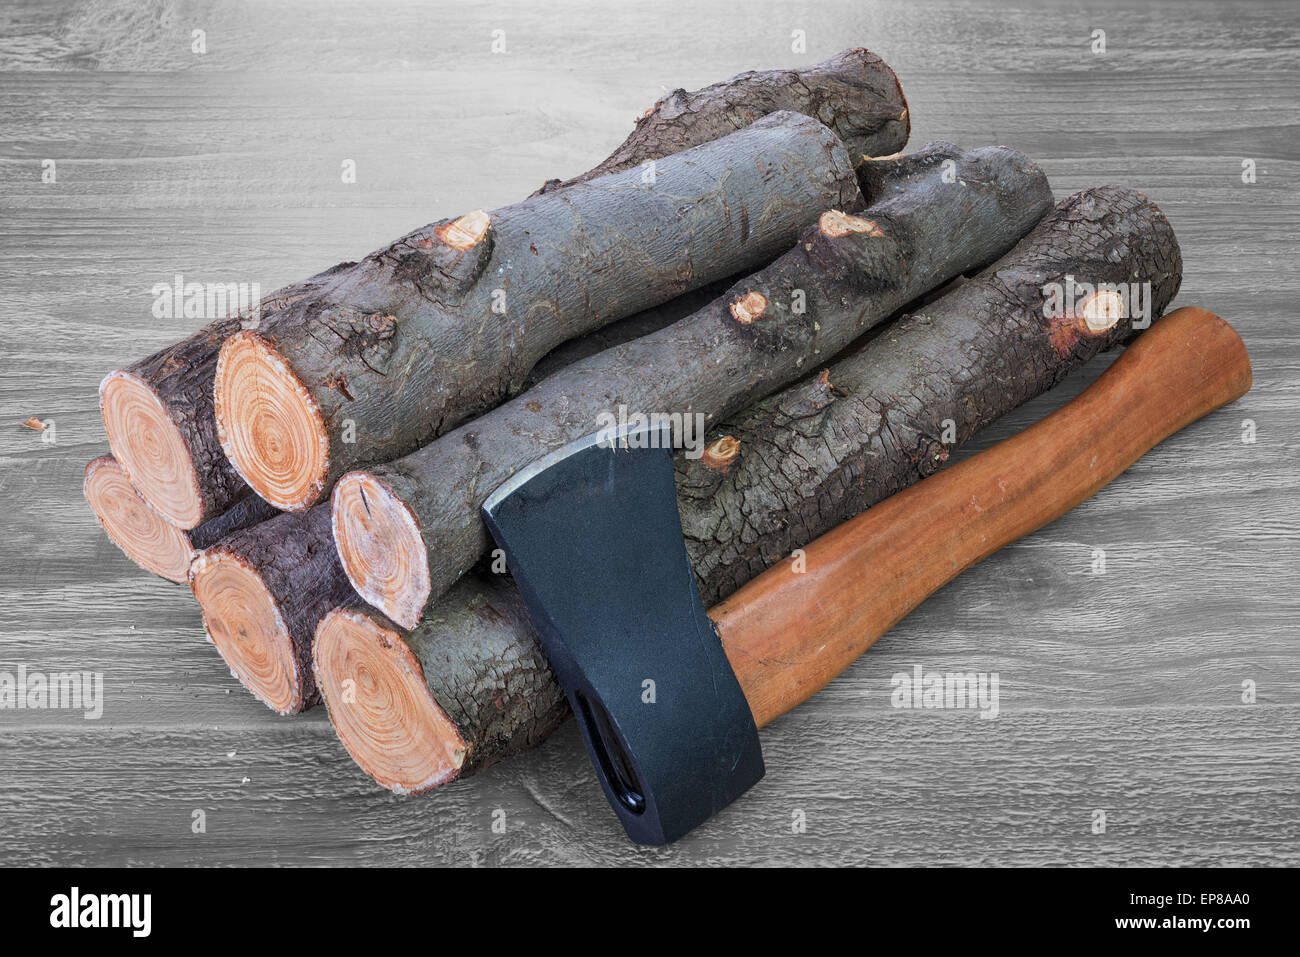 stack of firewood logs and axe on a wooden surface Stock Photo